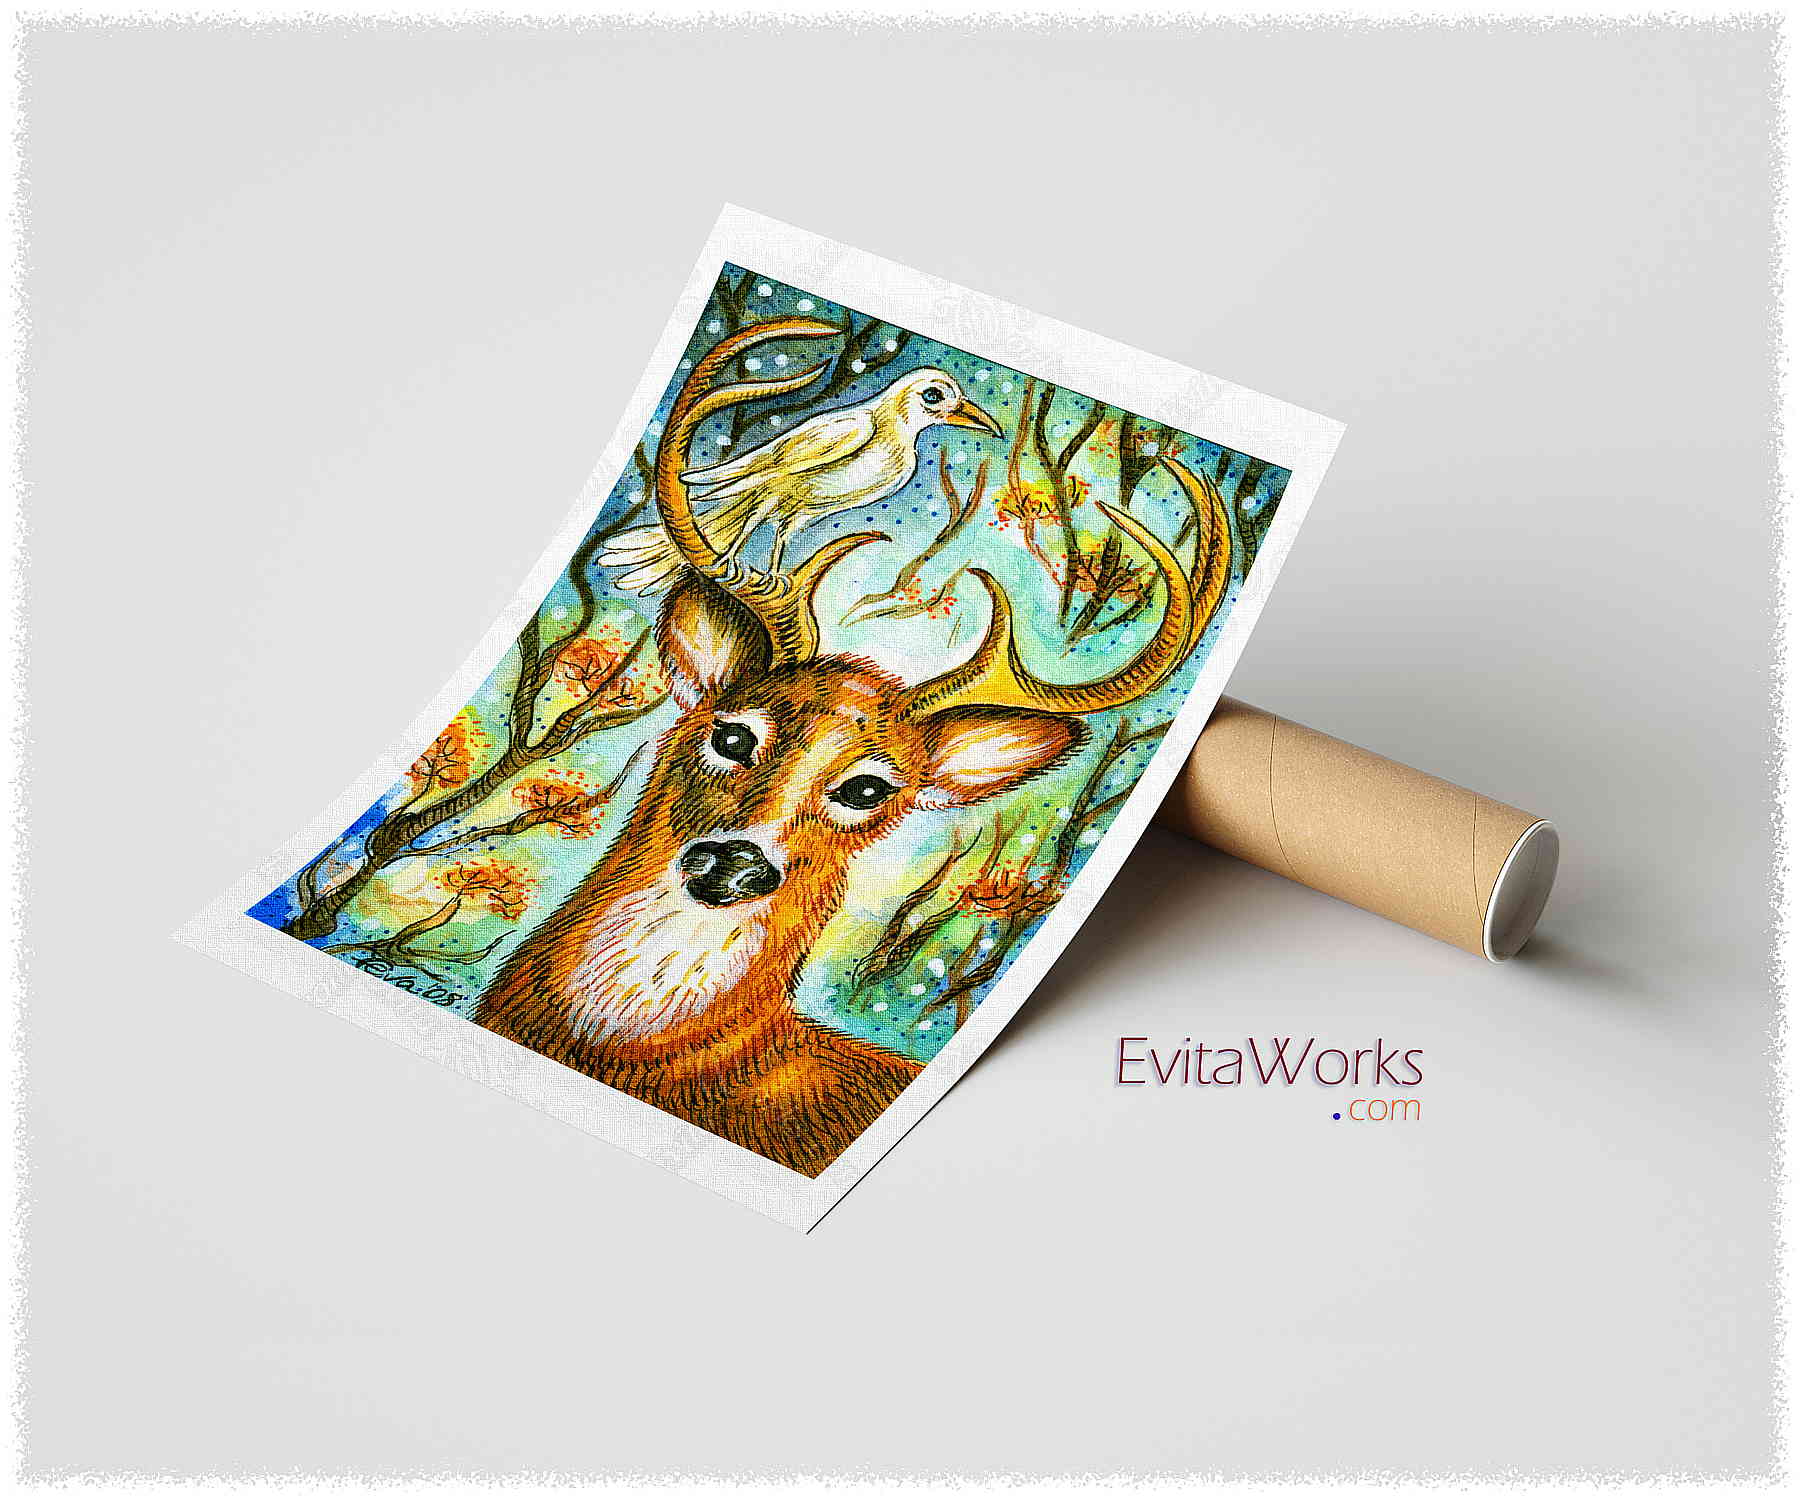 Hit to learn about "Deer 01, cute animalart" on prints